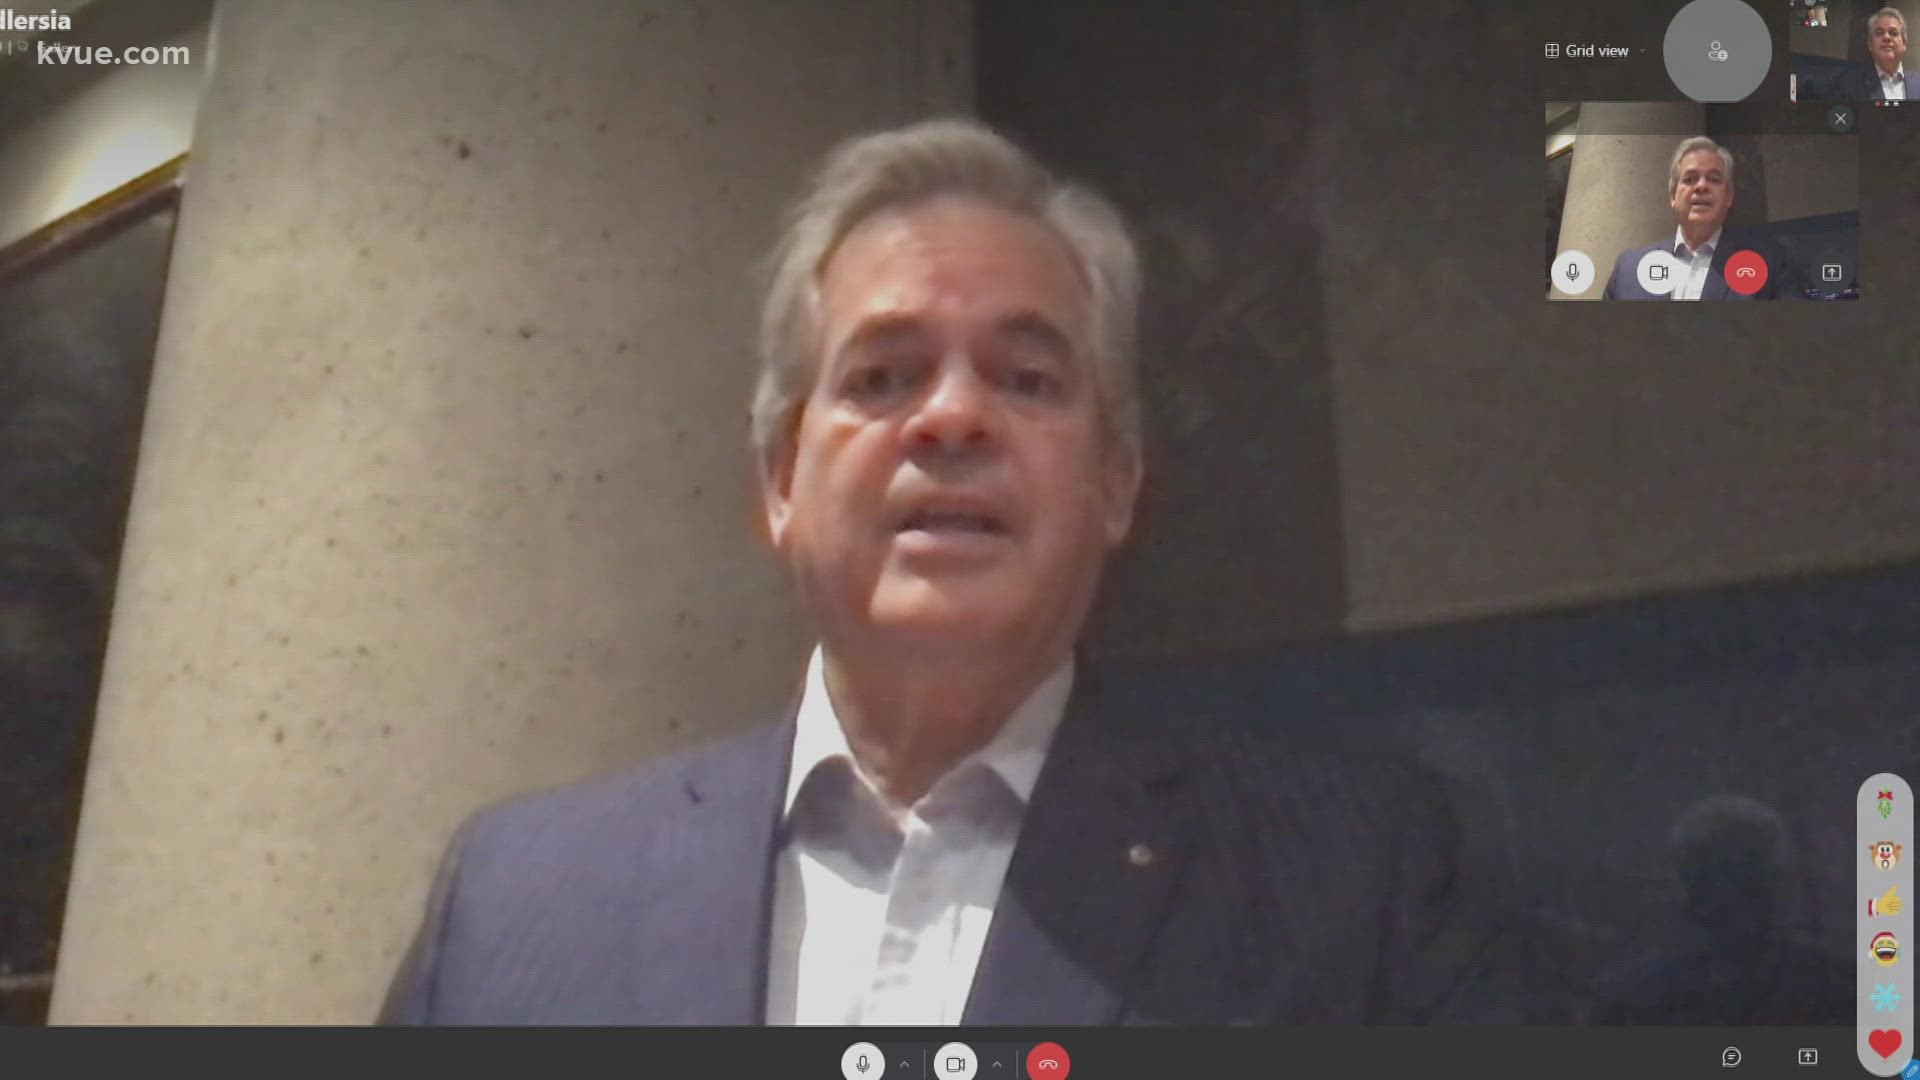 Austin Mayor Steve Adler joined KVUE Daybreak to discuss the omicron variant, winter weather preparedness and affordable housing. He also reflected on 2021.